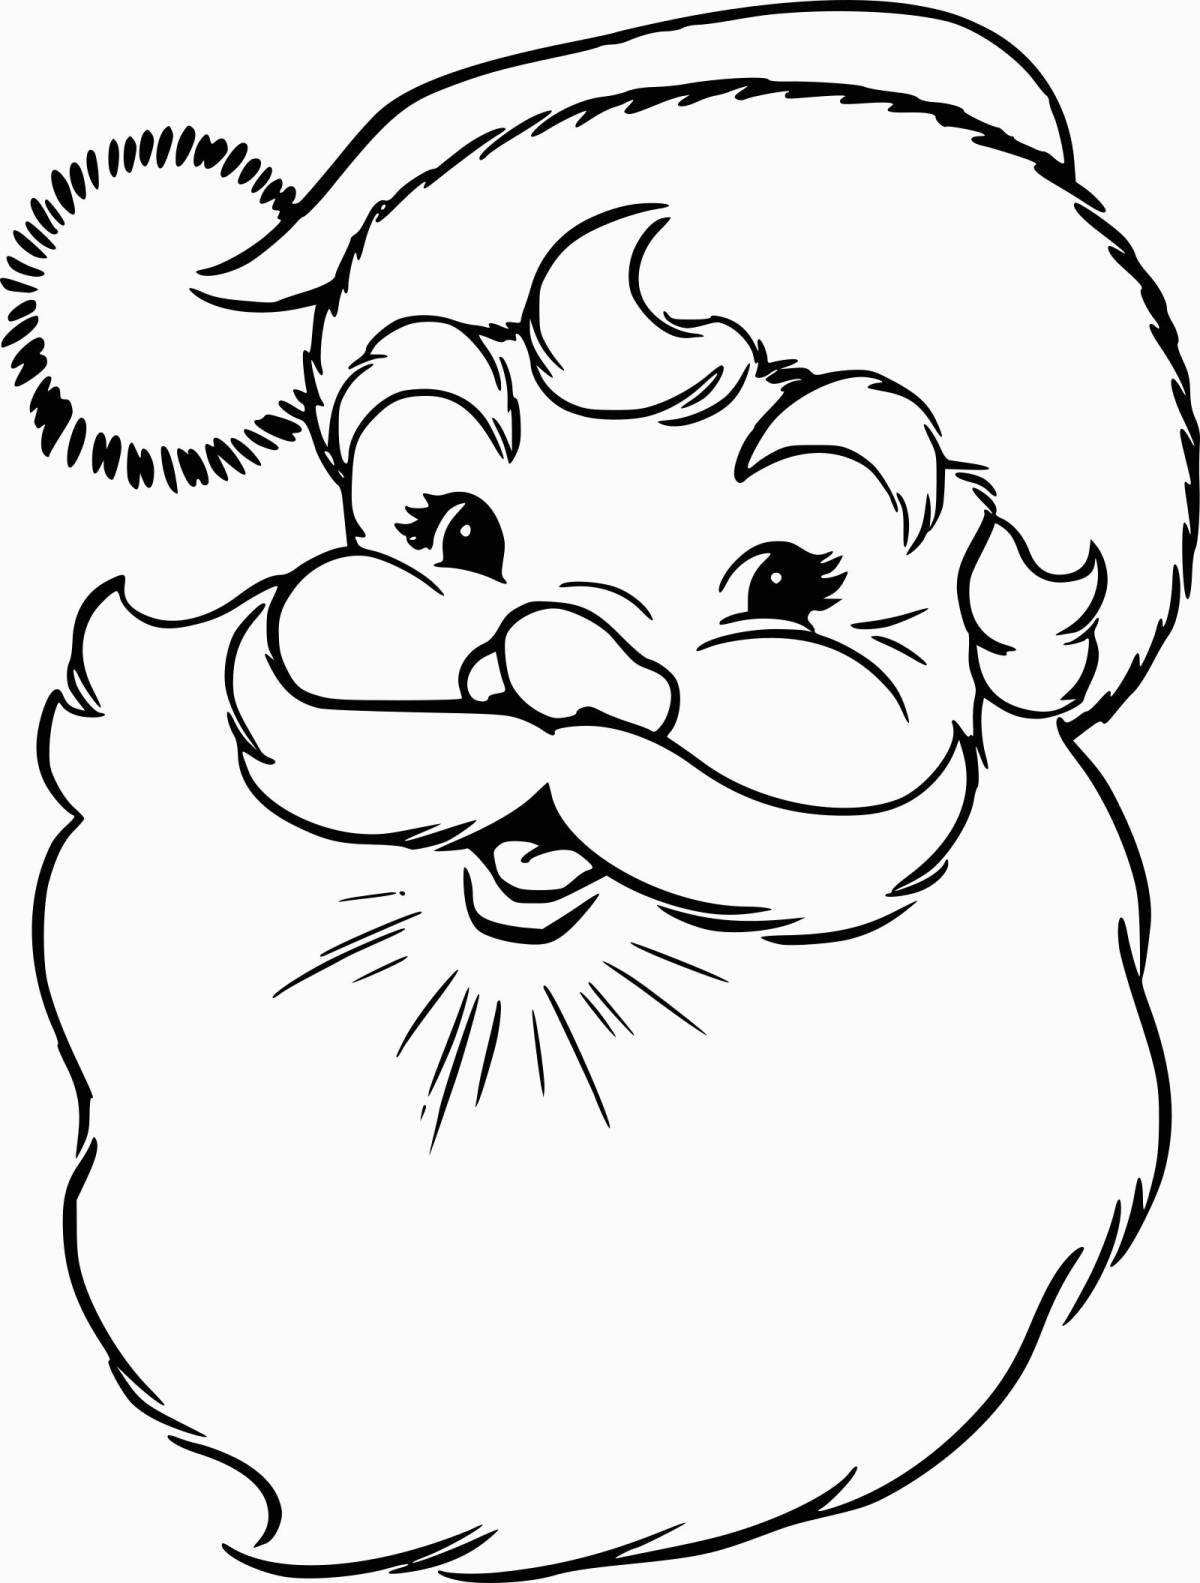 Coloring page merry santa claus mask